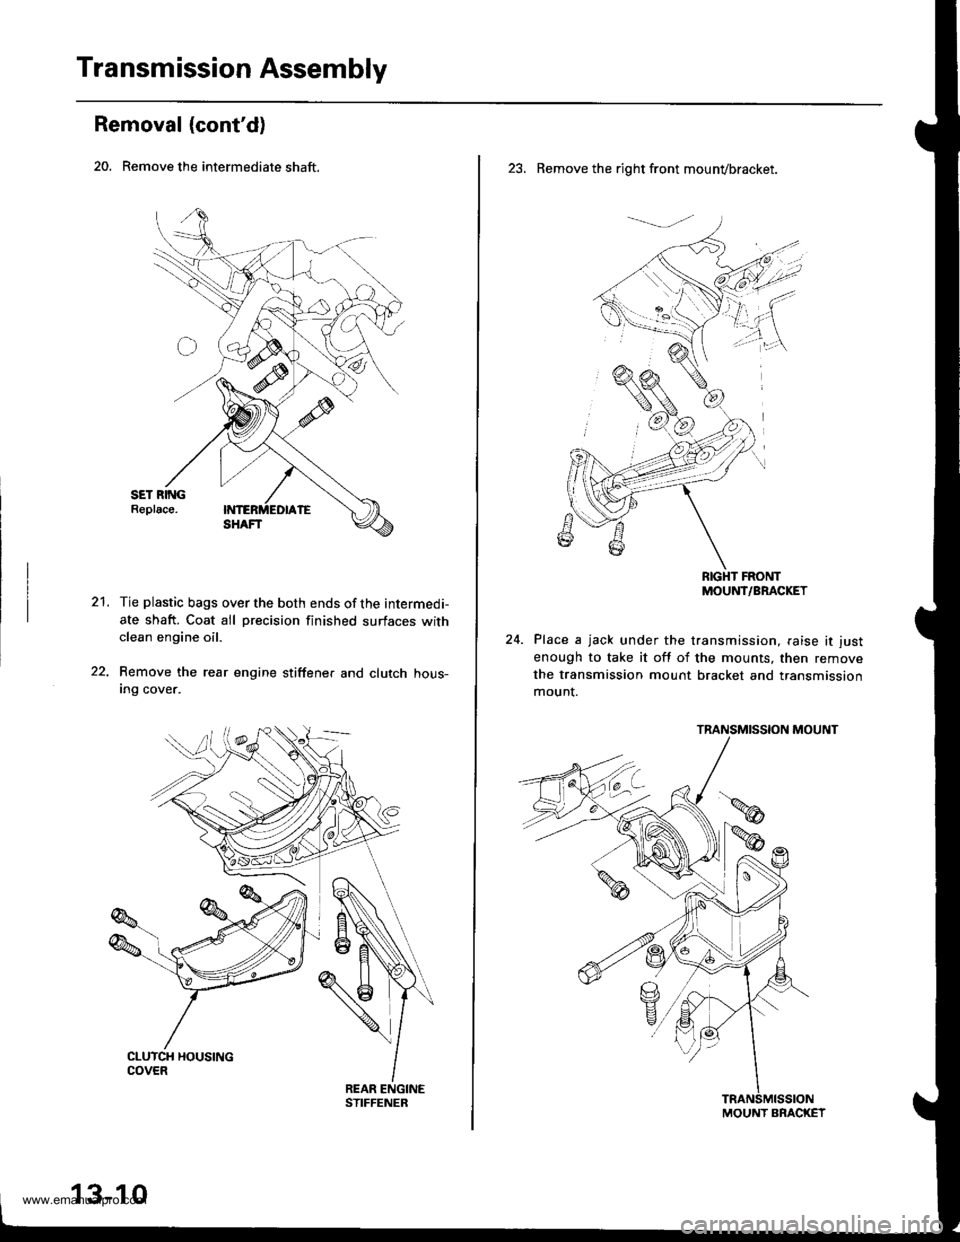 HONDA CR-V 1999 RD1-RD3 / 1.G Service Manual 
Transmission Assembly
Removal (contd)
20. Remove the intermediate shaft.
21.Tie plastic bags over the both ends of the intermedi-
ate shaft. Coat all precision finished surfaces withclean engine oil